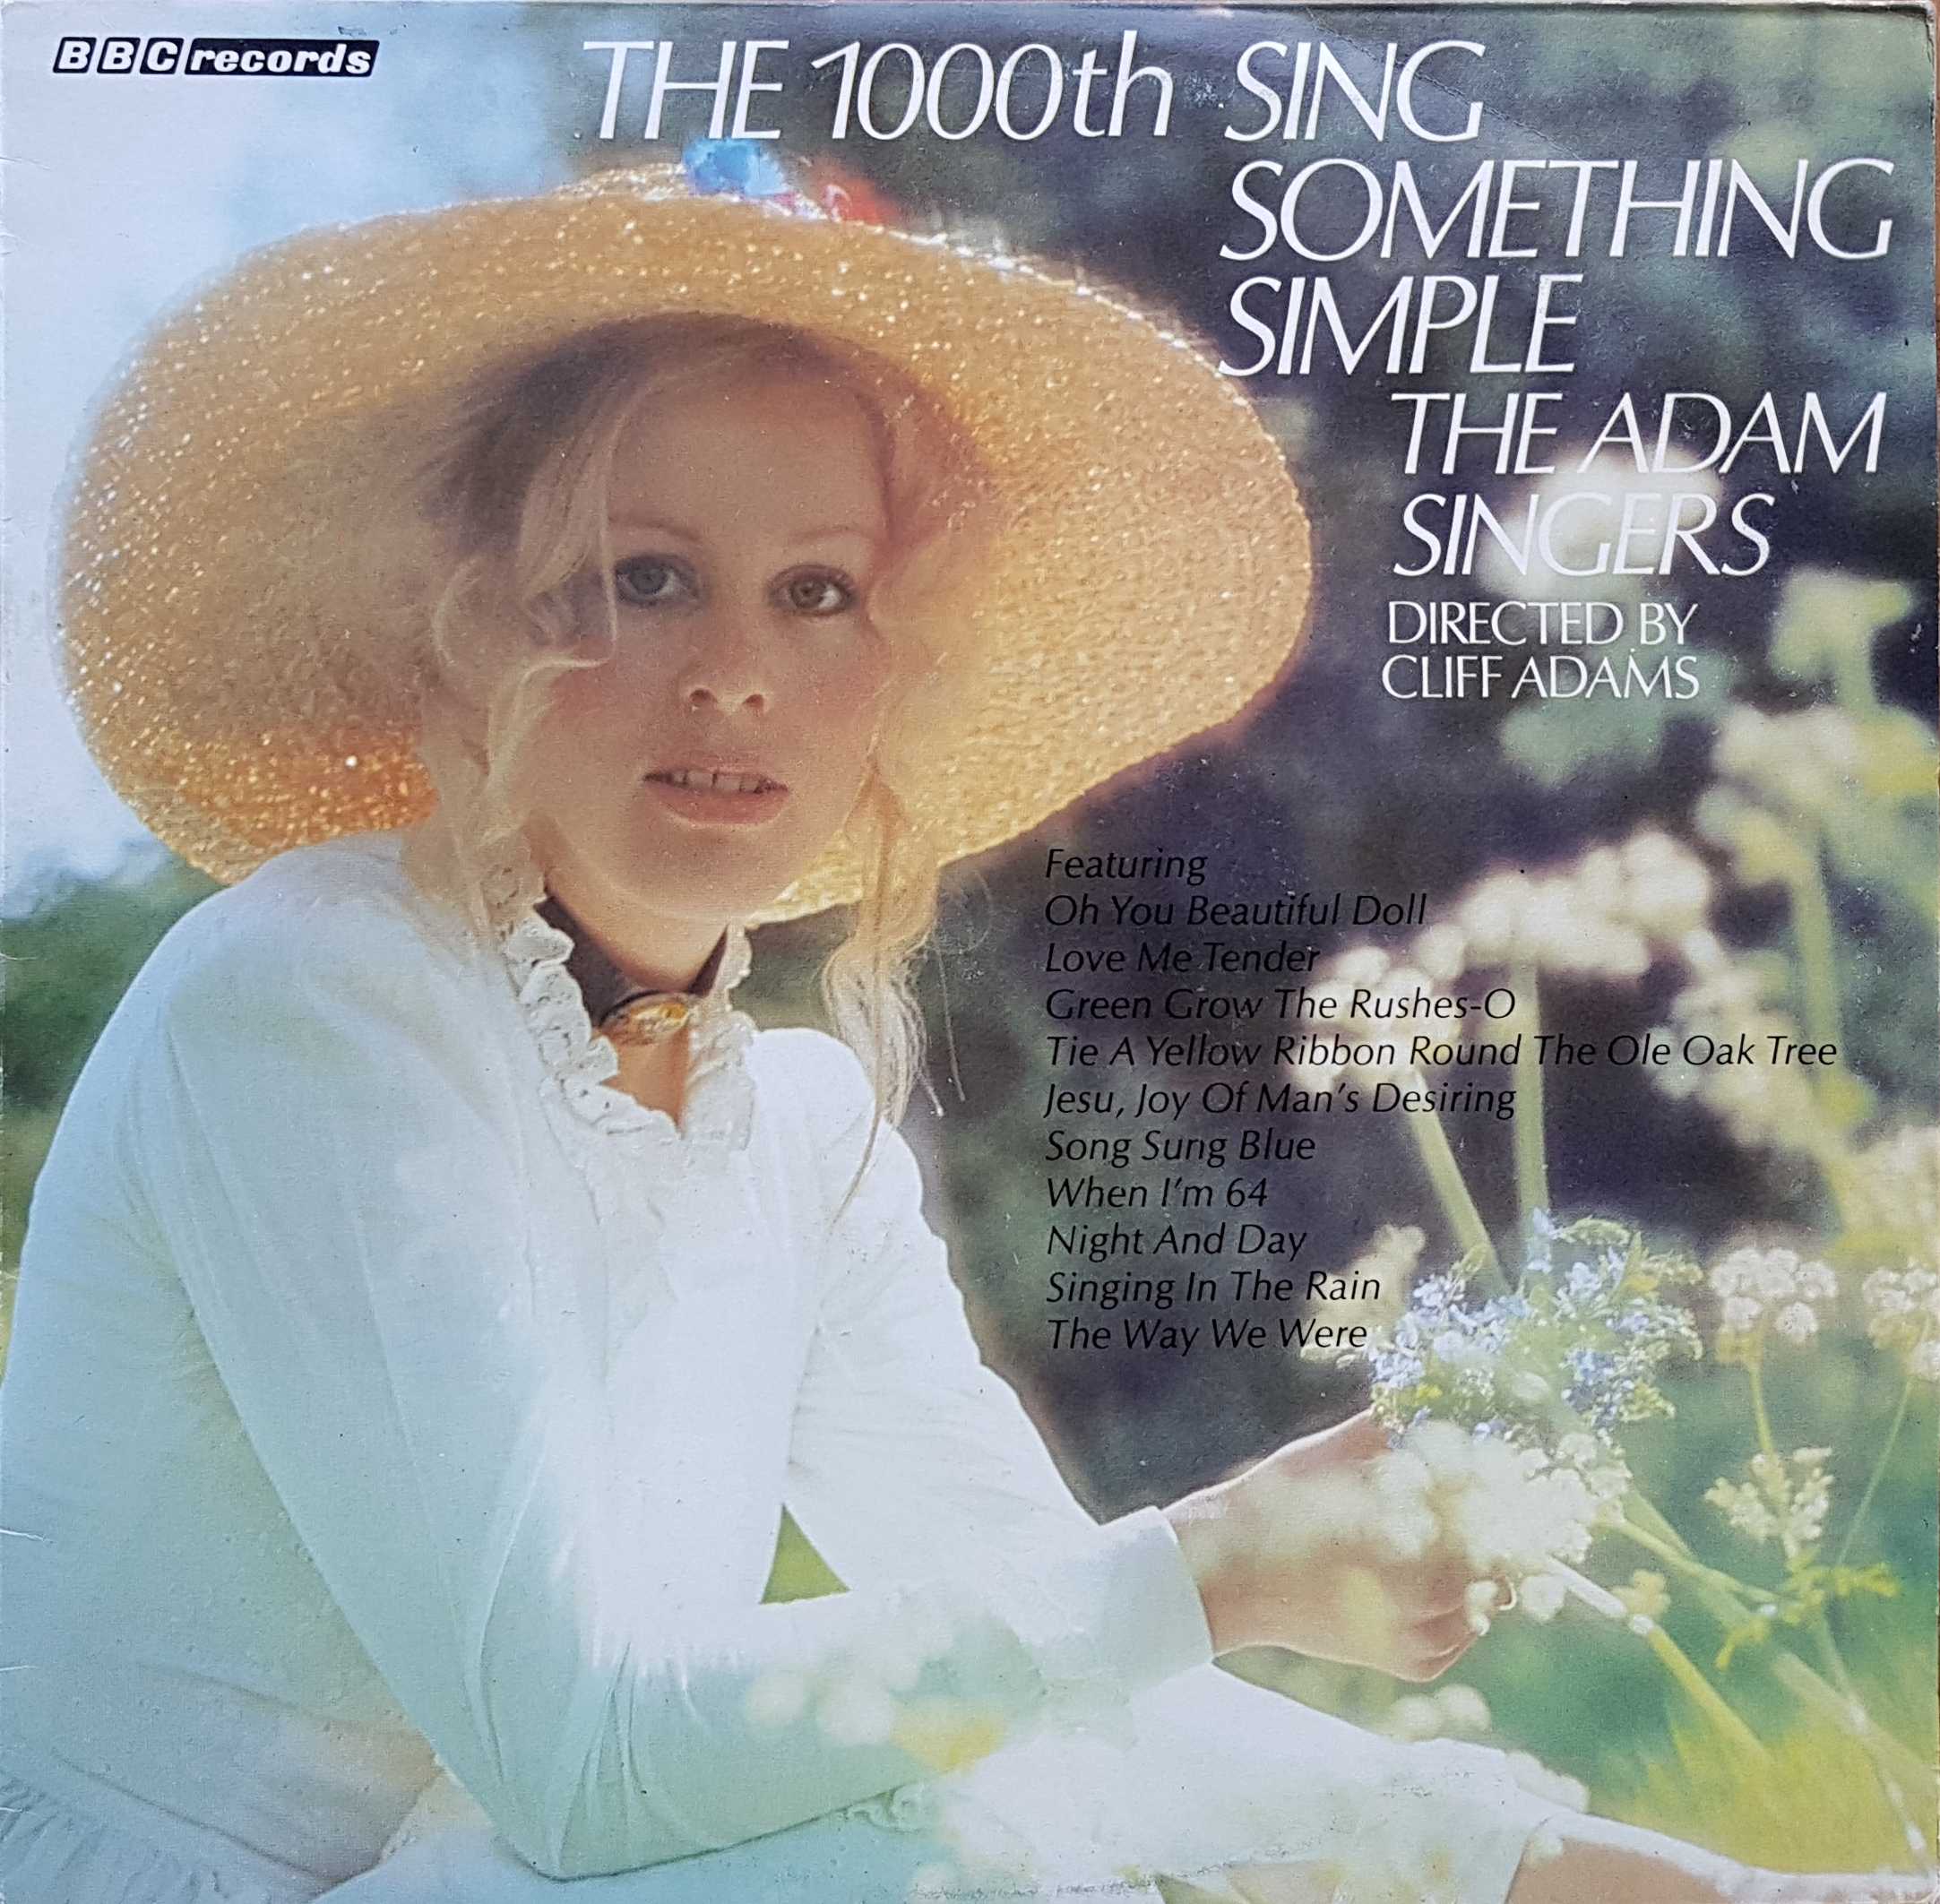 Picture of REH 373 1000th sing something simple by artist Various from the BBC records and Tapes library